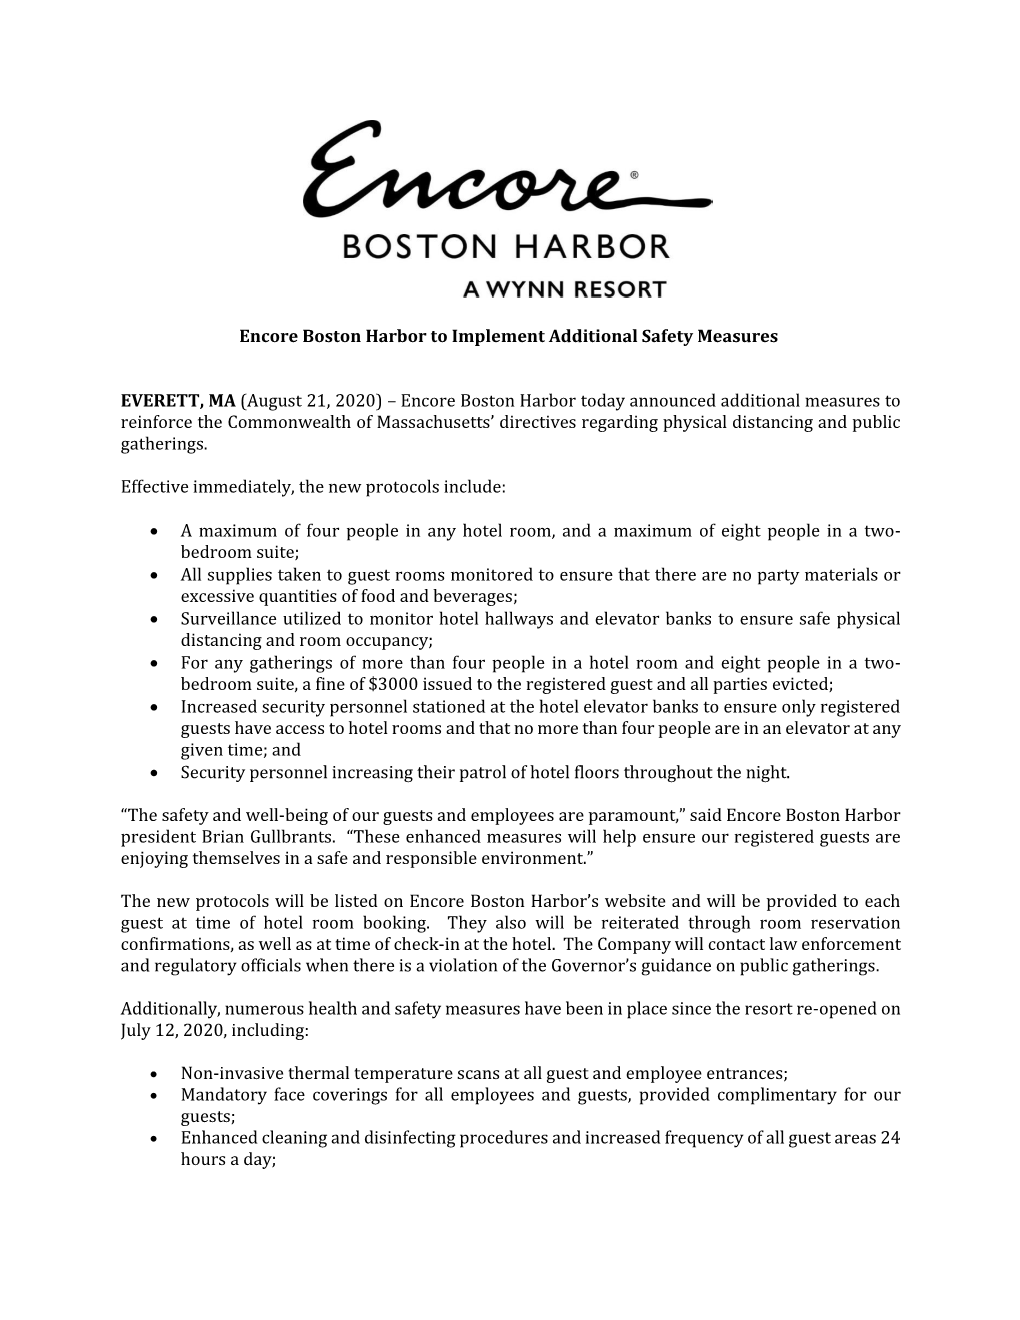 Encore Boston Harbor Implements Additional Safety Measures